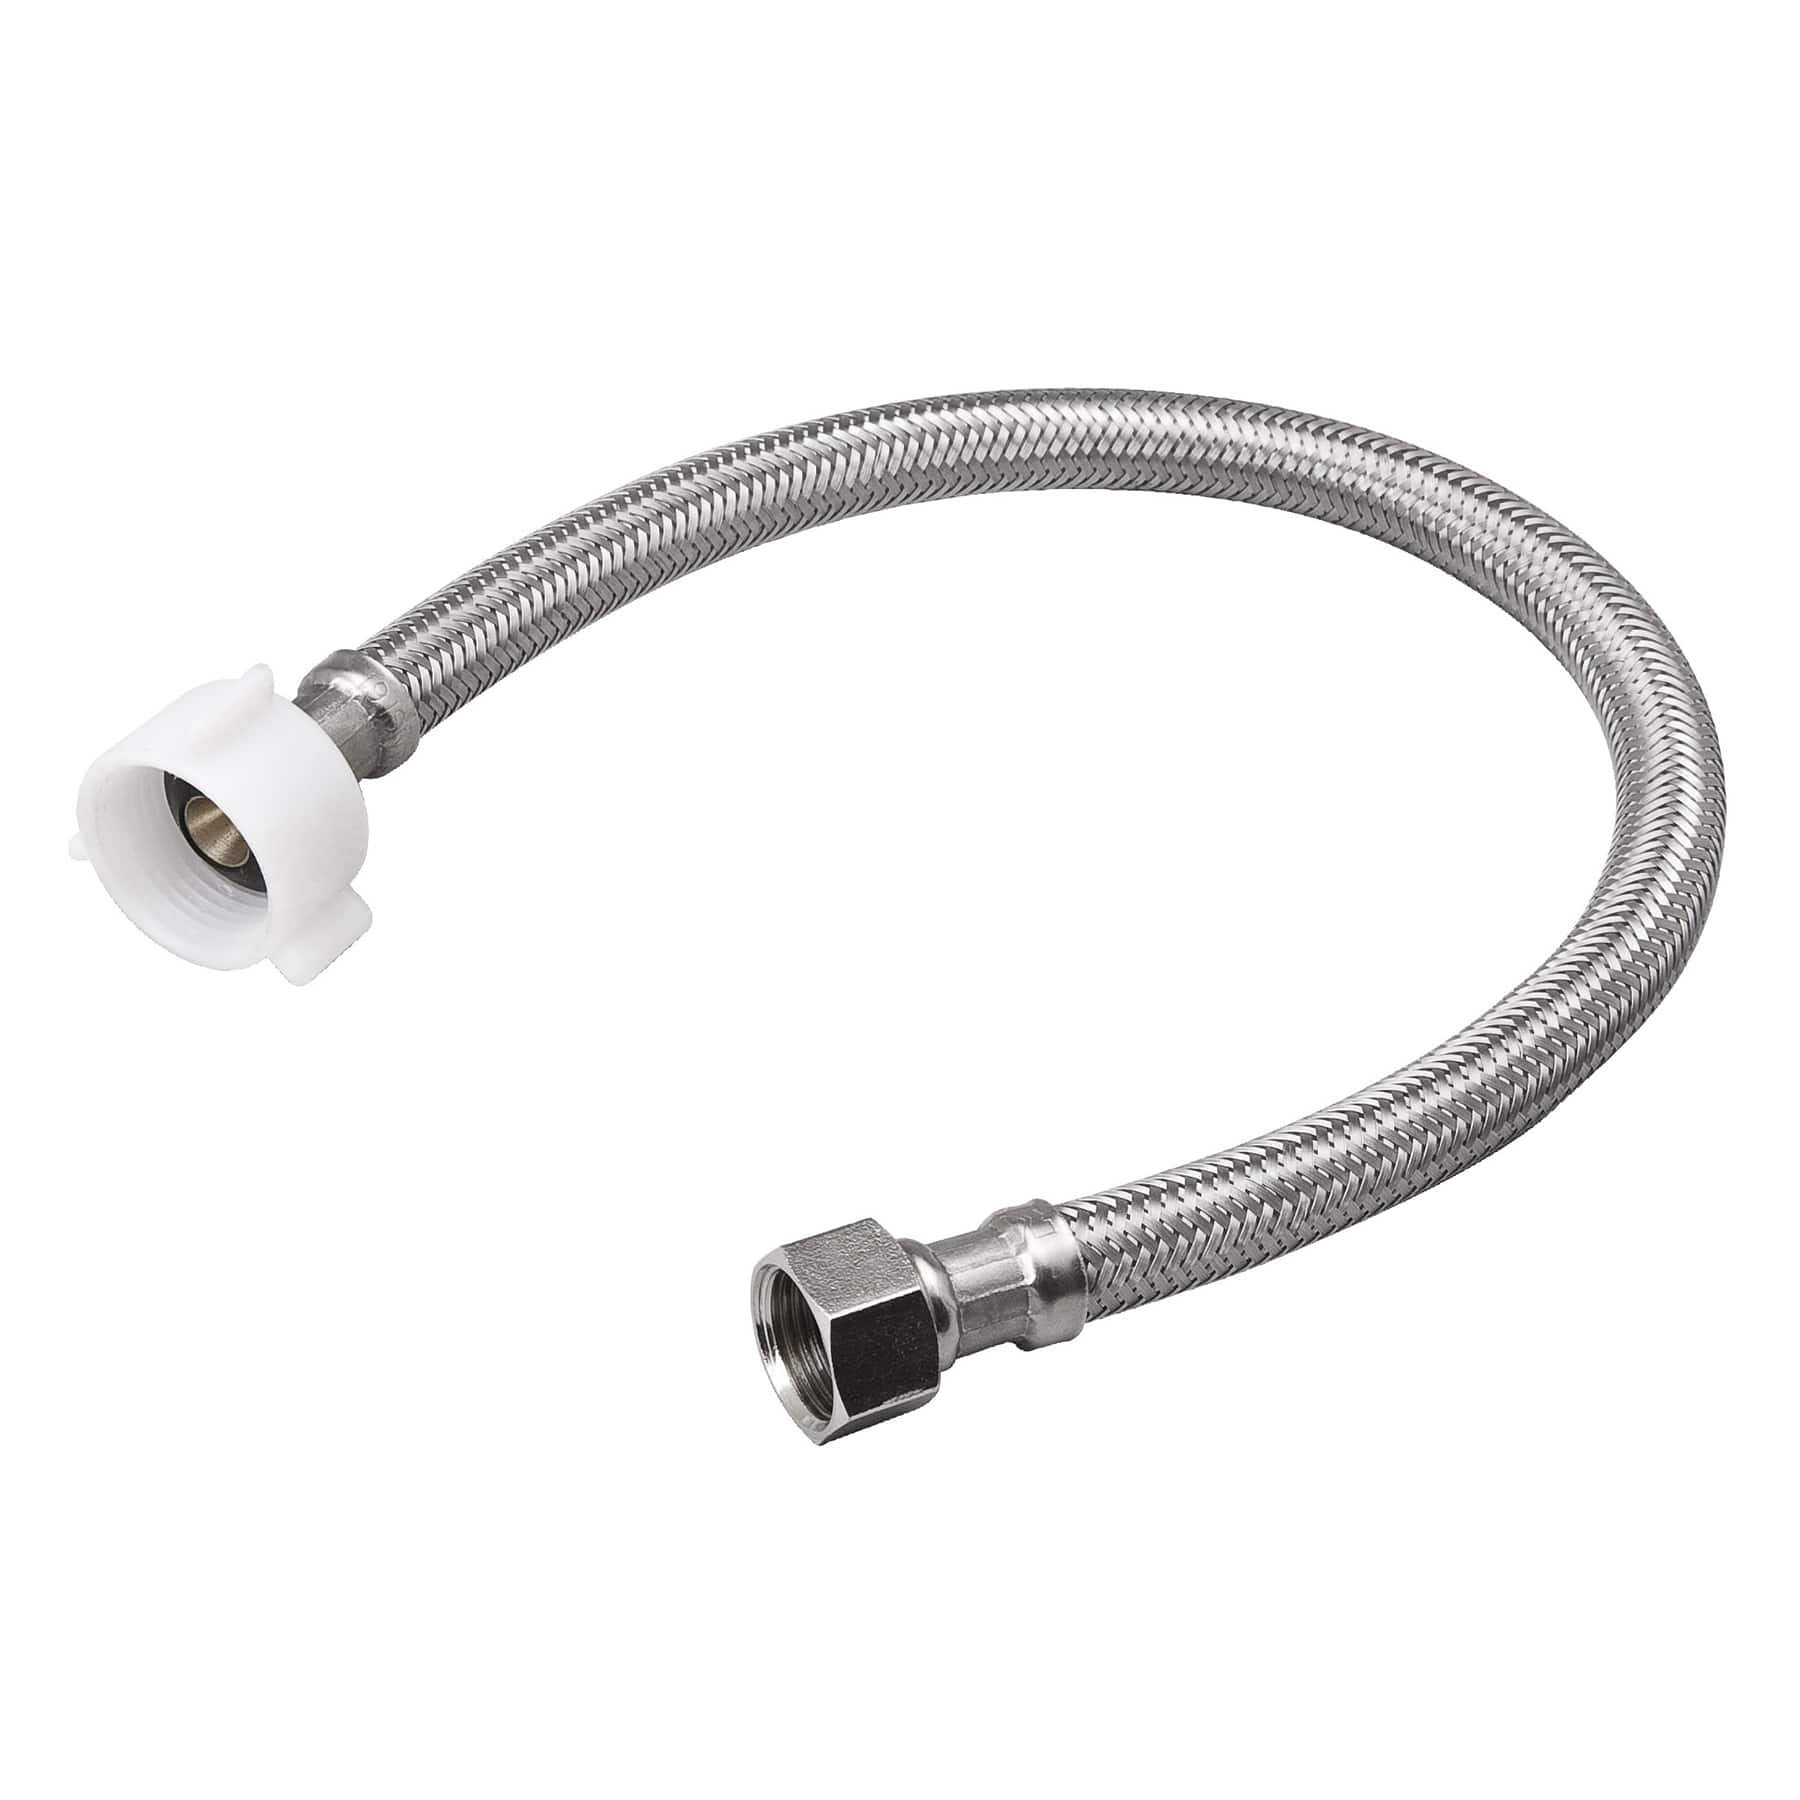 B and K Toilet Connector - 3/8" x 7/8"